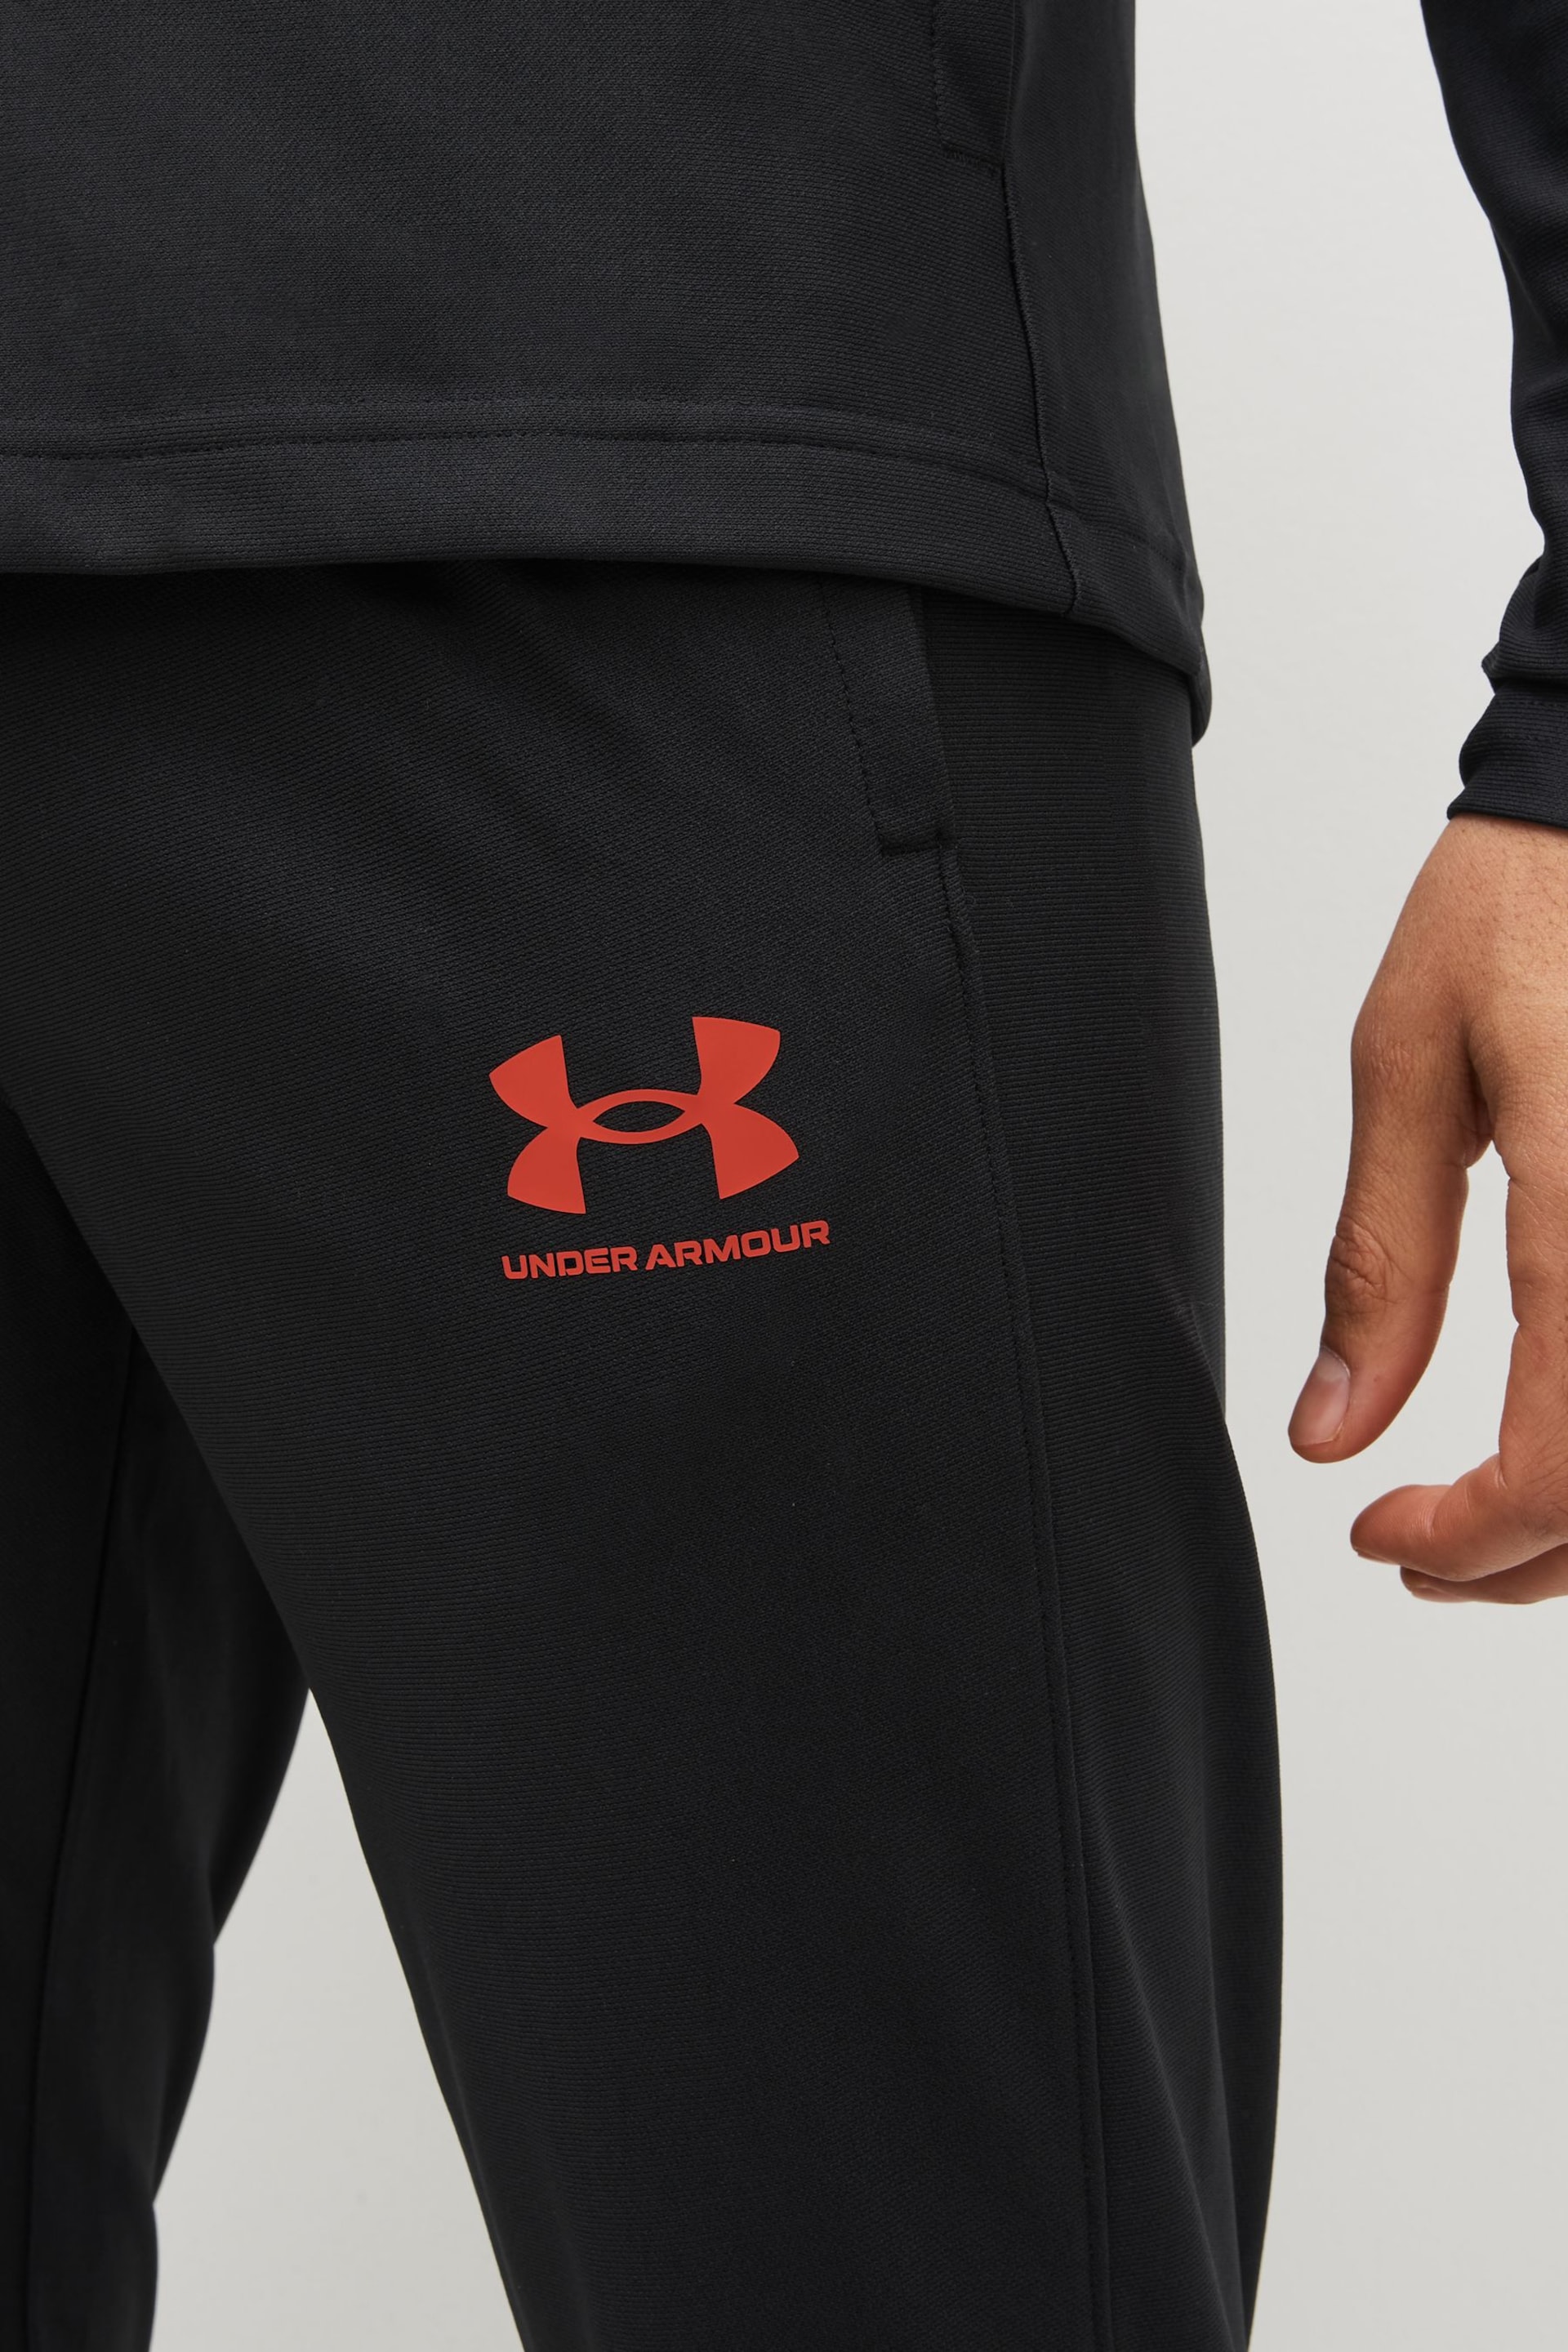 Under Armour Black/Red Challenger Football Tracksuit - Image 4 of 7